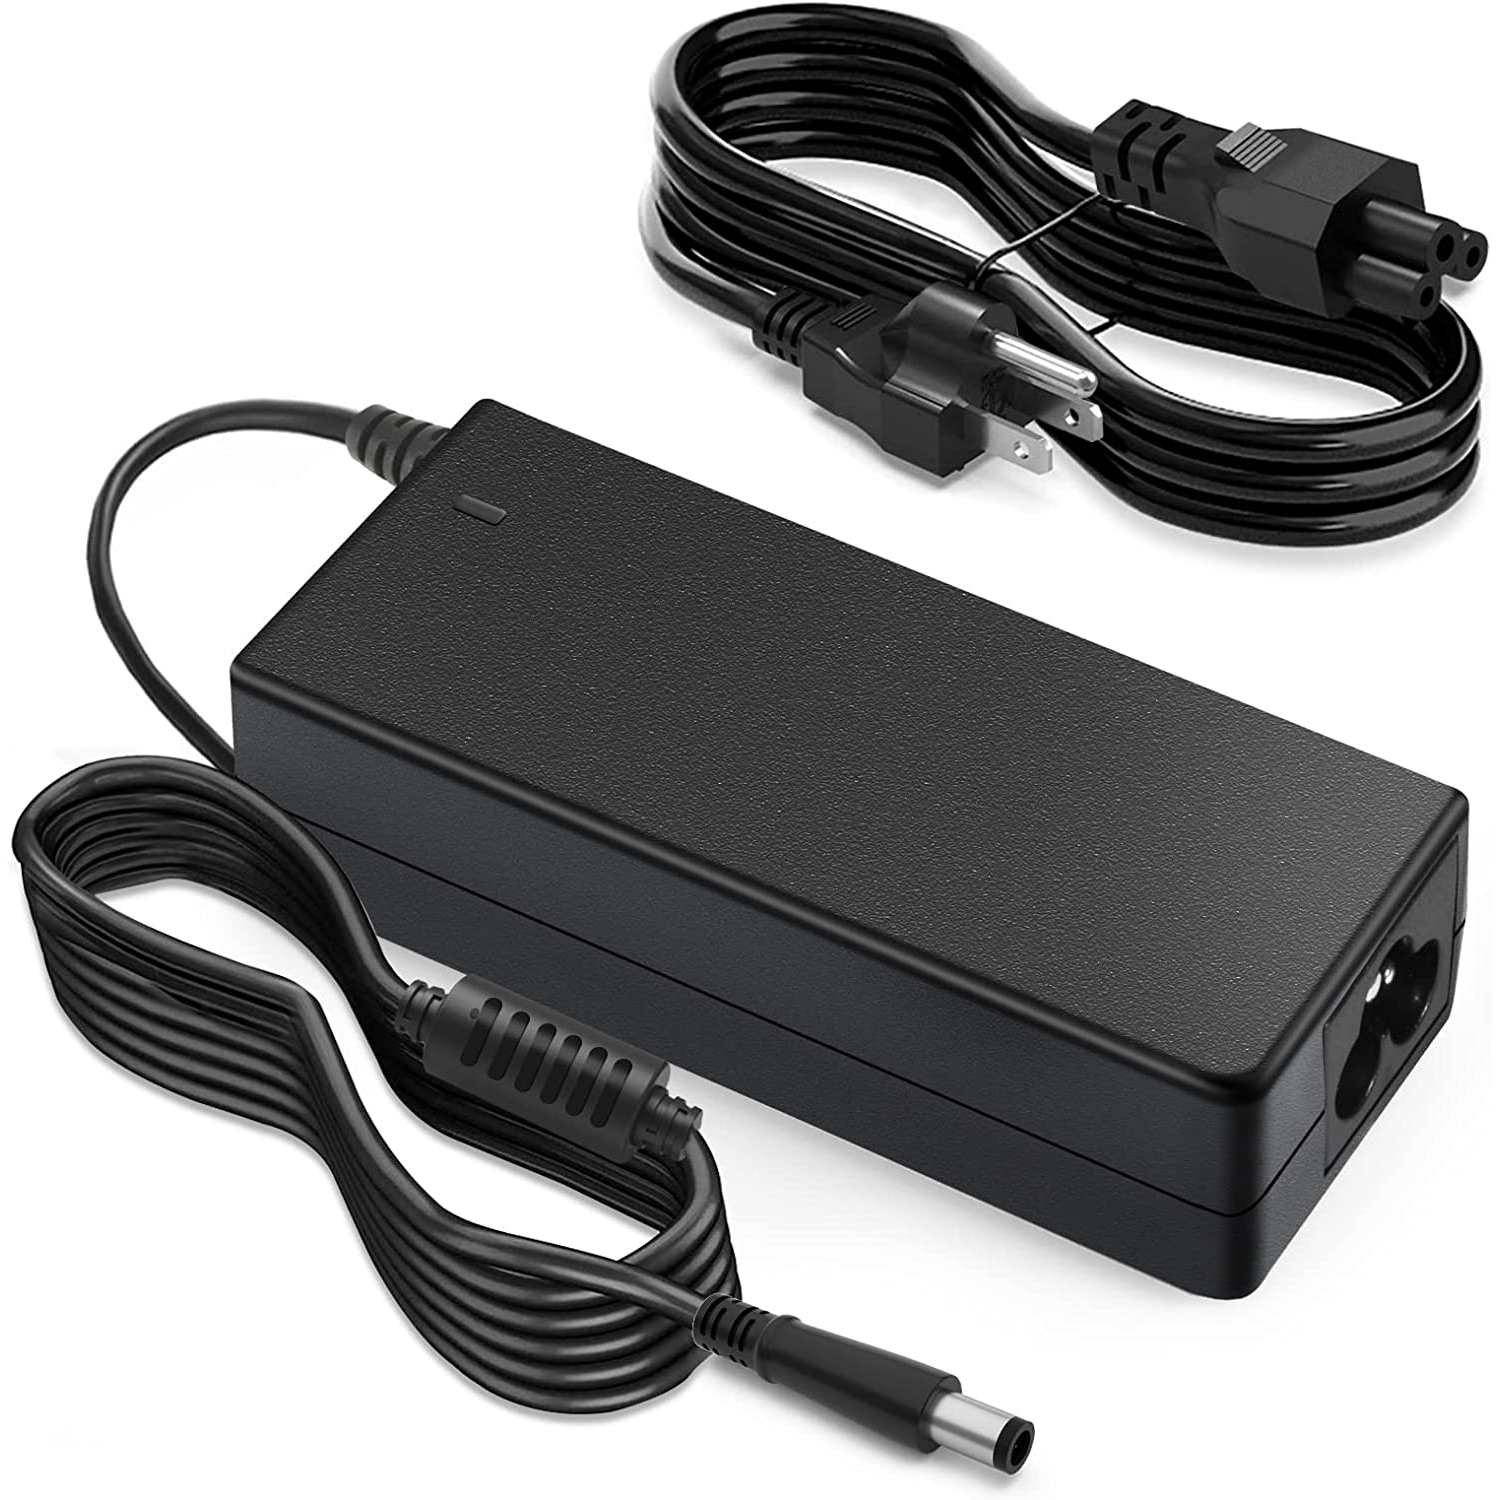 (7.4 x 5.0mm) 19V 4.74A 90W Laptop Charger for HP Pavilion All-in-One Desktop, HP Elitebook 8440P 8460P 8470P 8530P 8540P 8560P 8570P 2540P 2560P Power Adapter Cord Supply